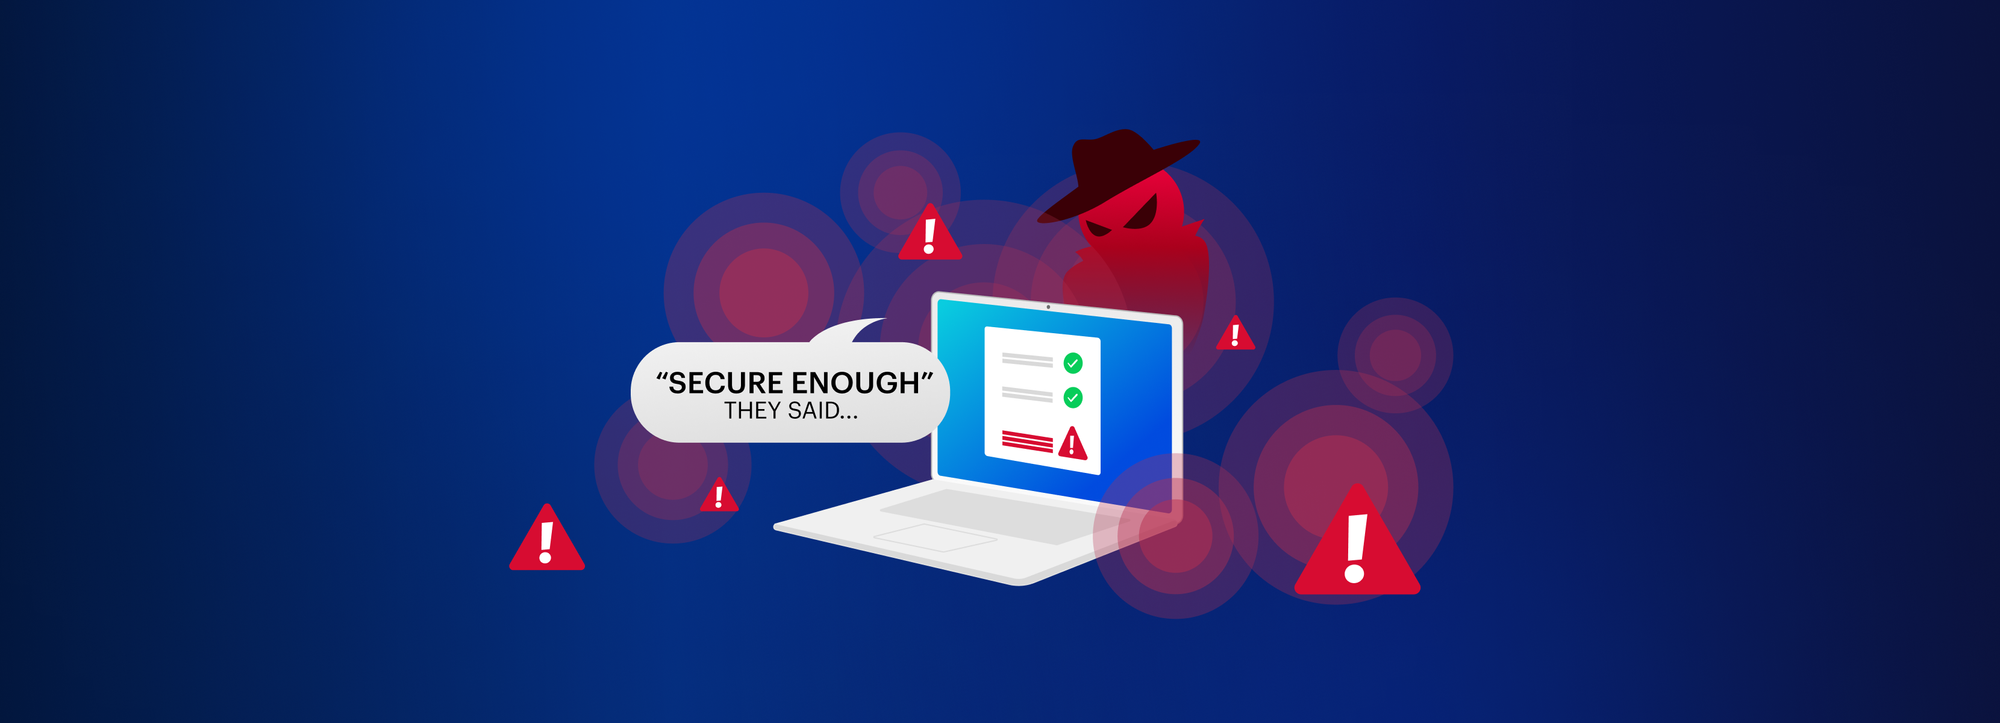 Unveiling Security Vulnerabilities: Why secure enough is NOT an option